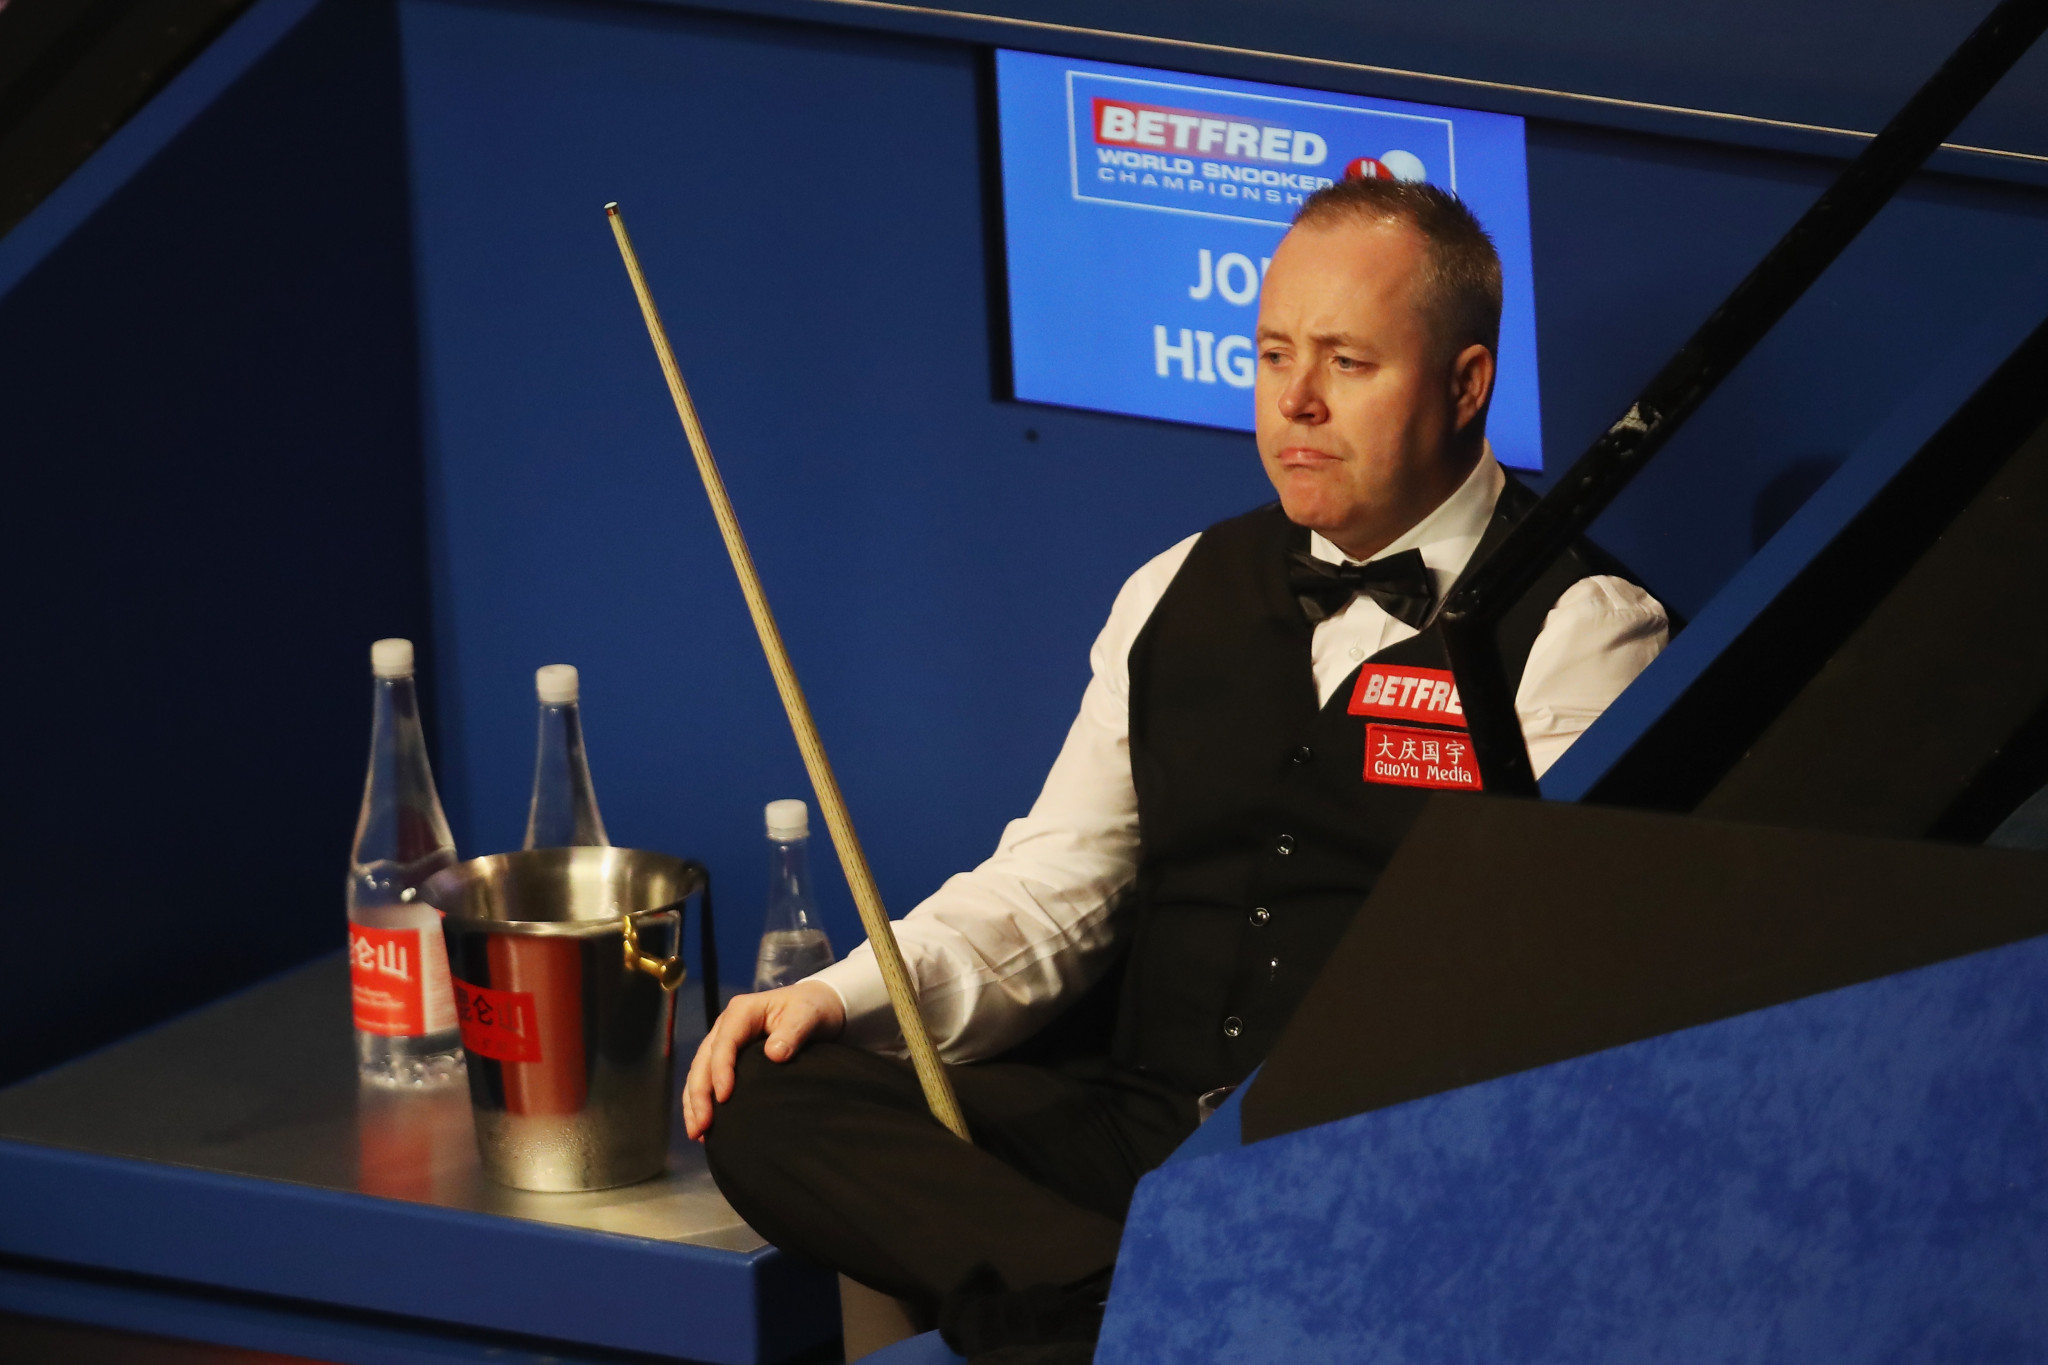 John Higgins is four frames away from a place in the final of the World Snooker Championship in Sheffield ©Getty Images